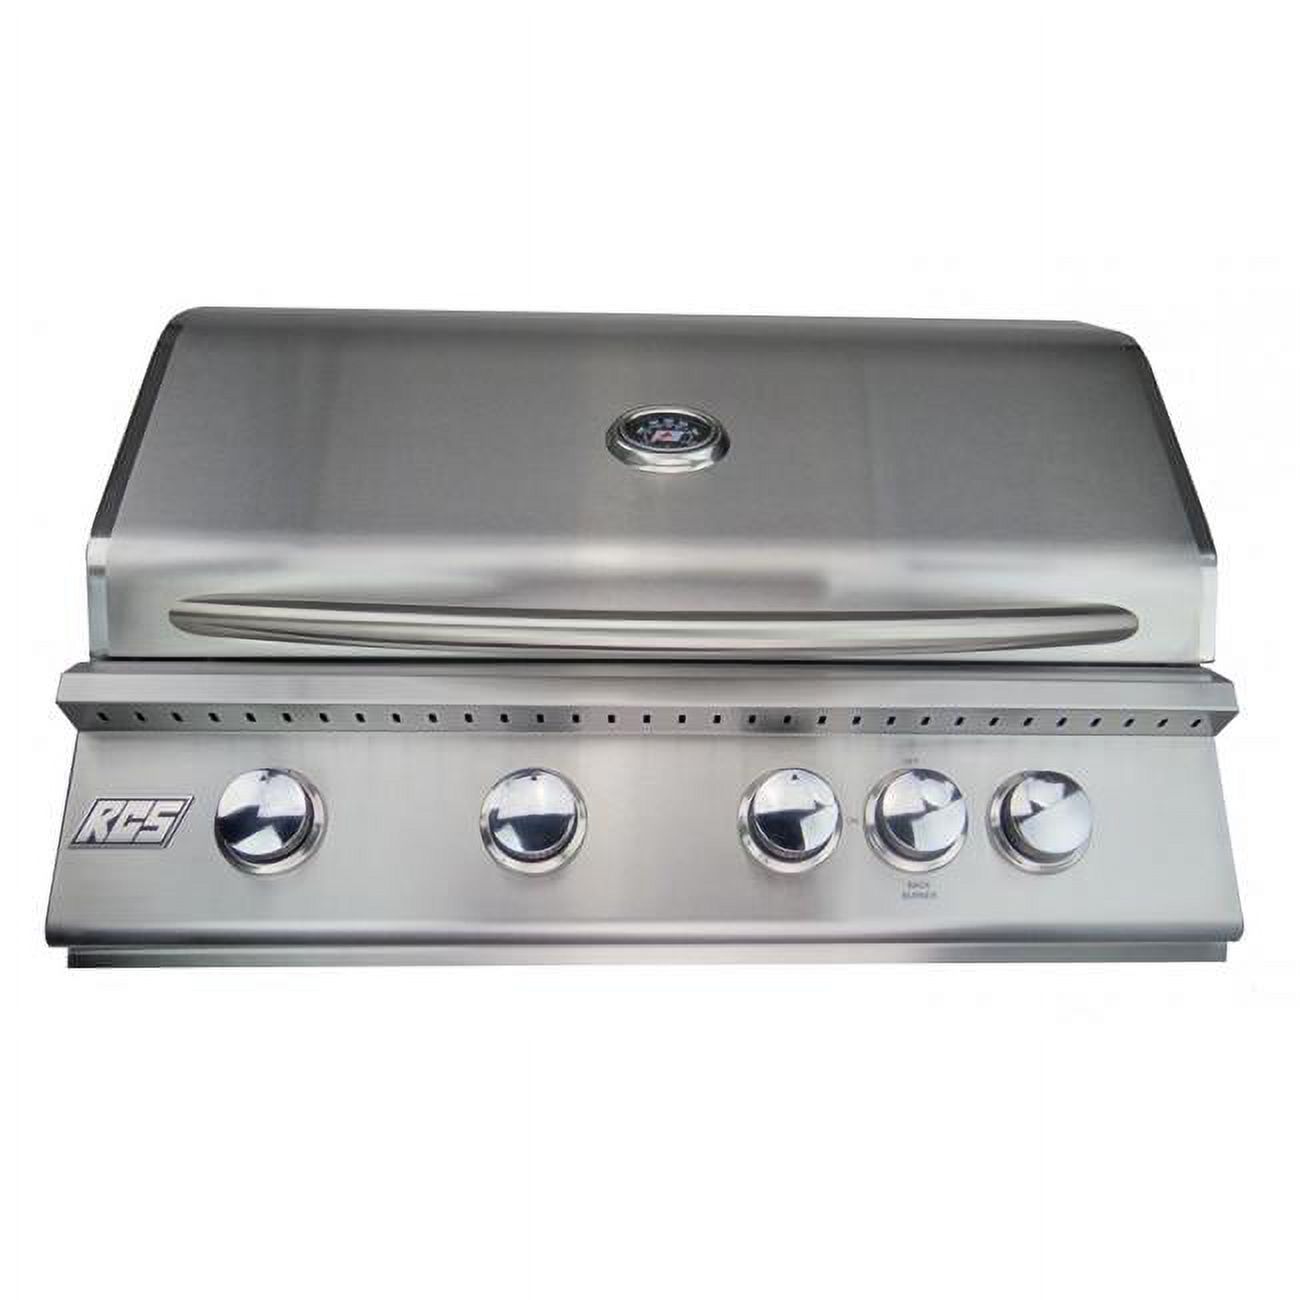 32 in. Premier Grill with Rear Burner-Propane, Stainless Steel - image 1 of 1